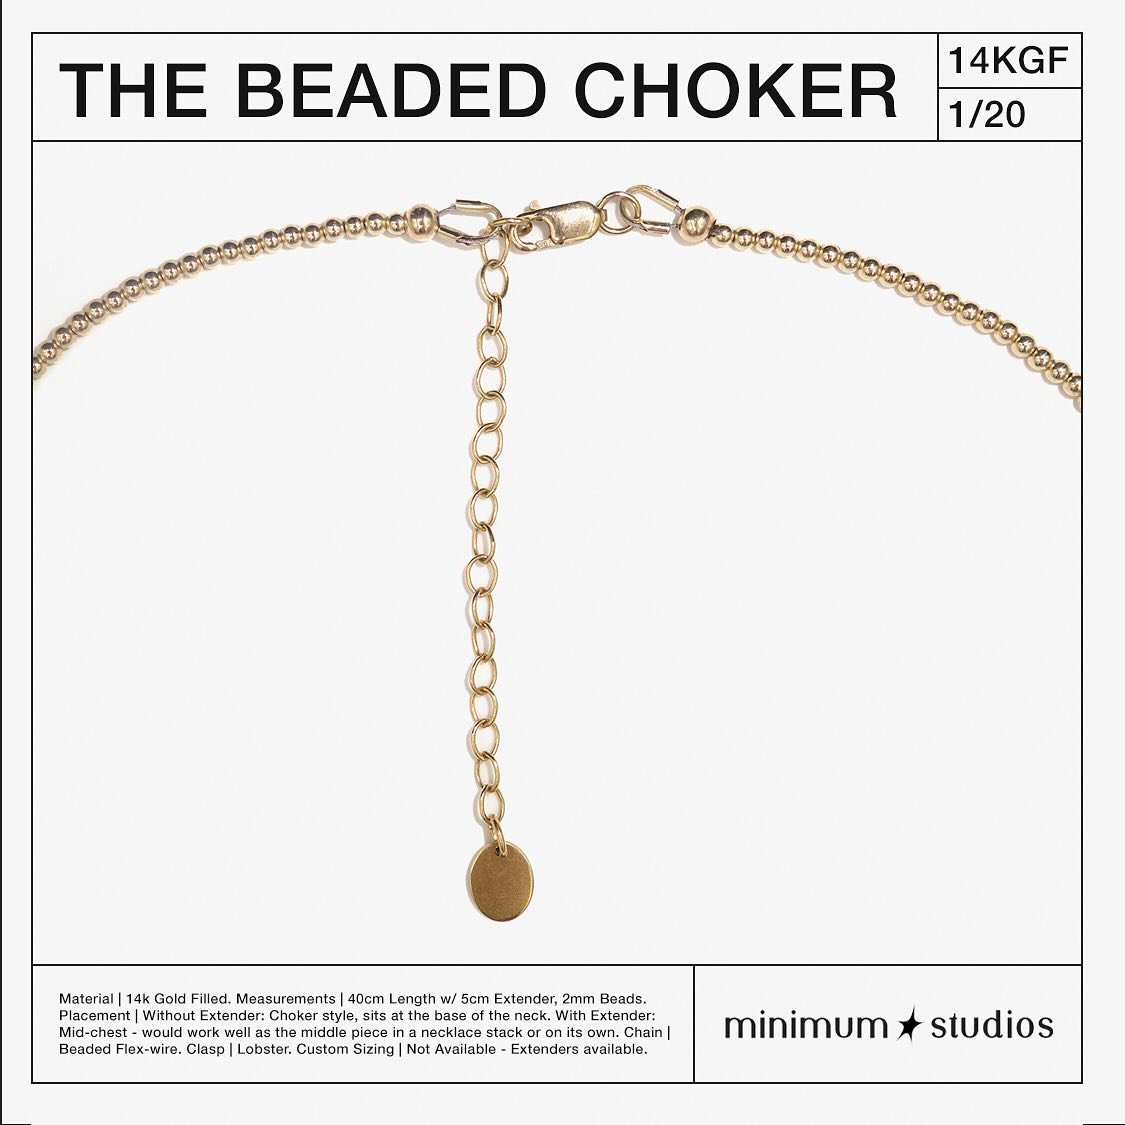 One of 30+ brand new pieces ⛓️🩶 The Beaded Necklace is handmade and features 200+ 2mm 14k Gold Filled beads. 

This piece measures 40cm in length with an additional 5cm extender. 

High quality, everyday jewellery designed and finished from our Melb